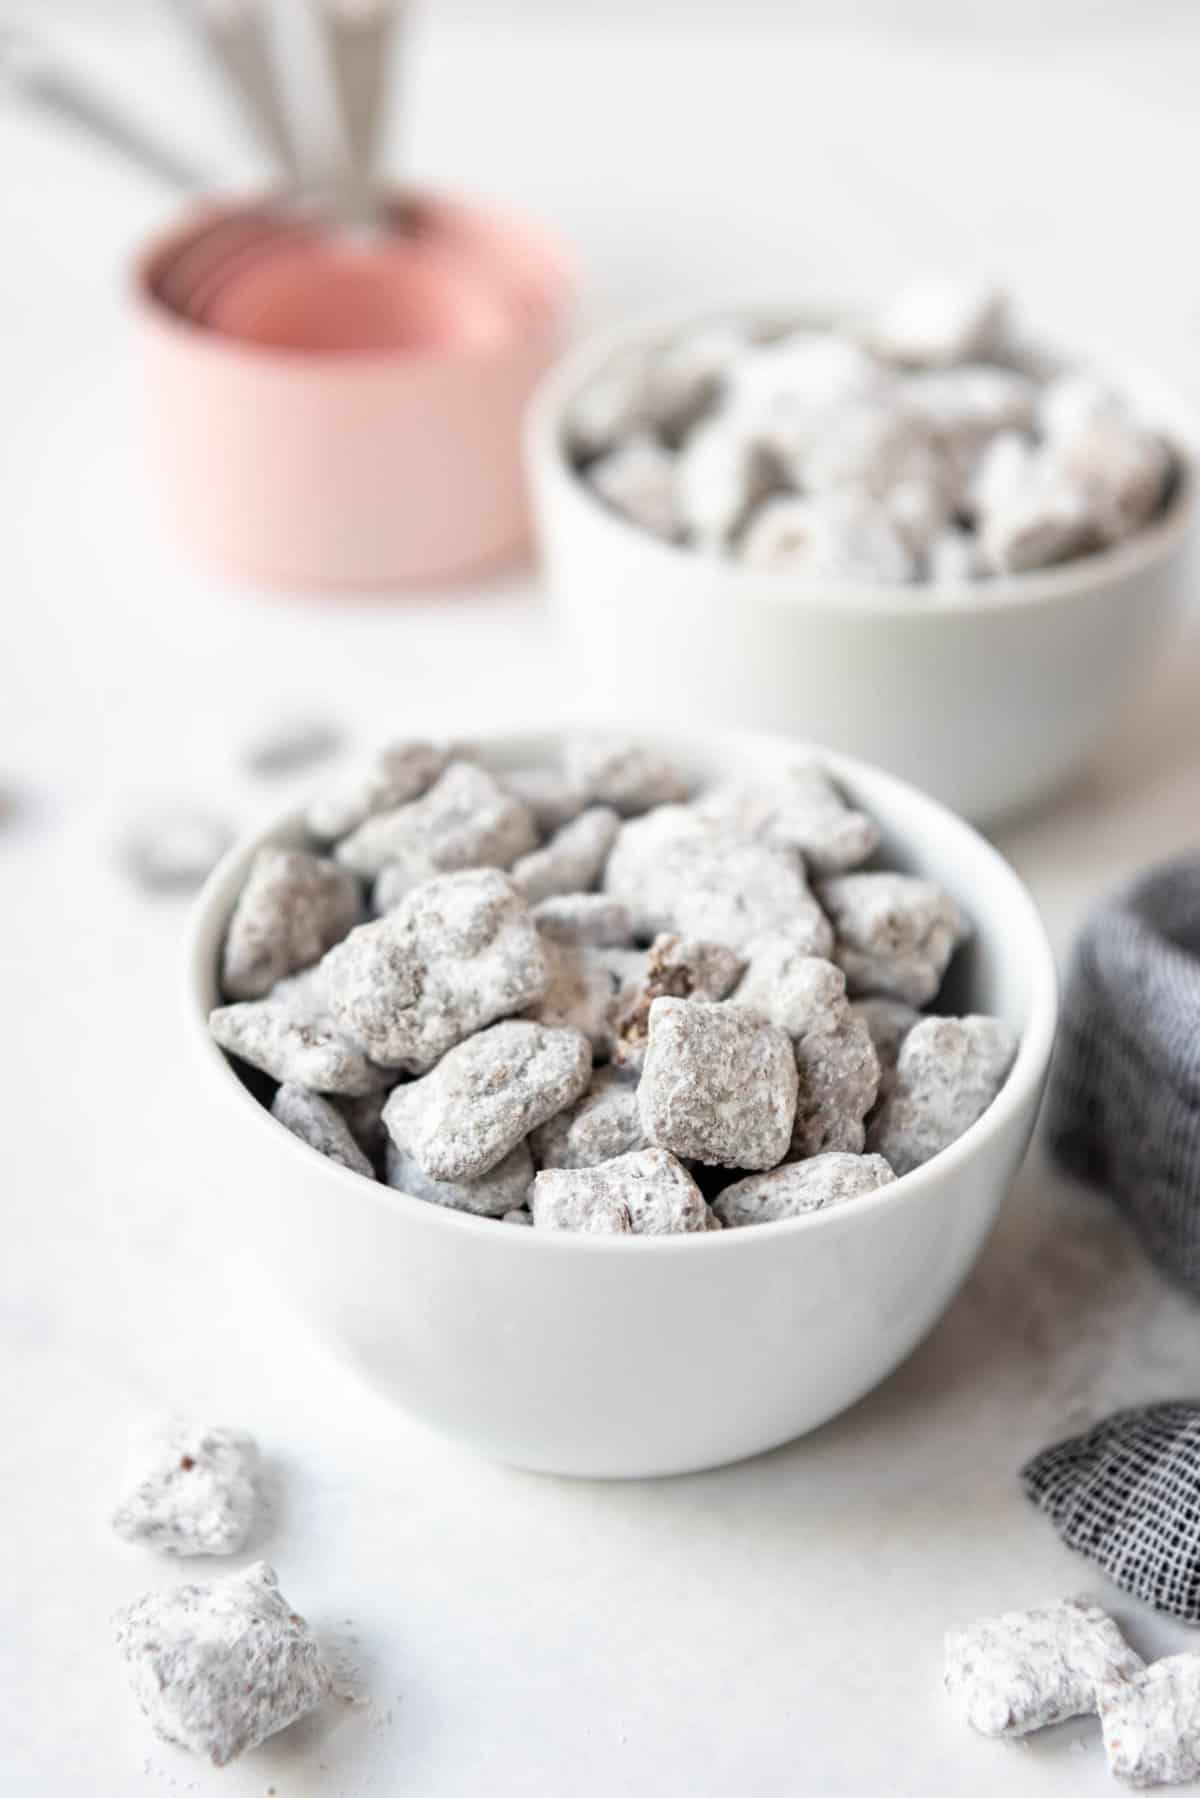 An image of muddy buddies in bowls.